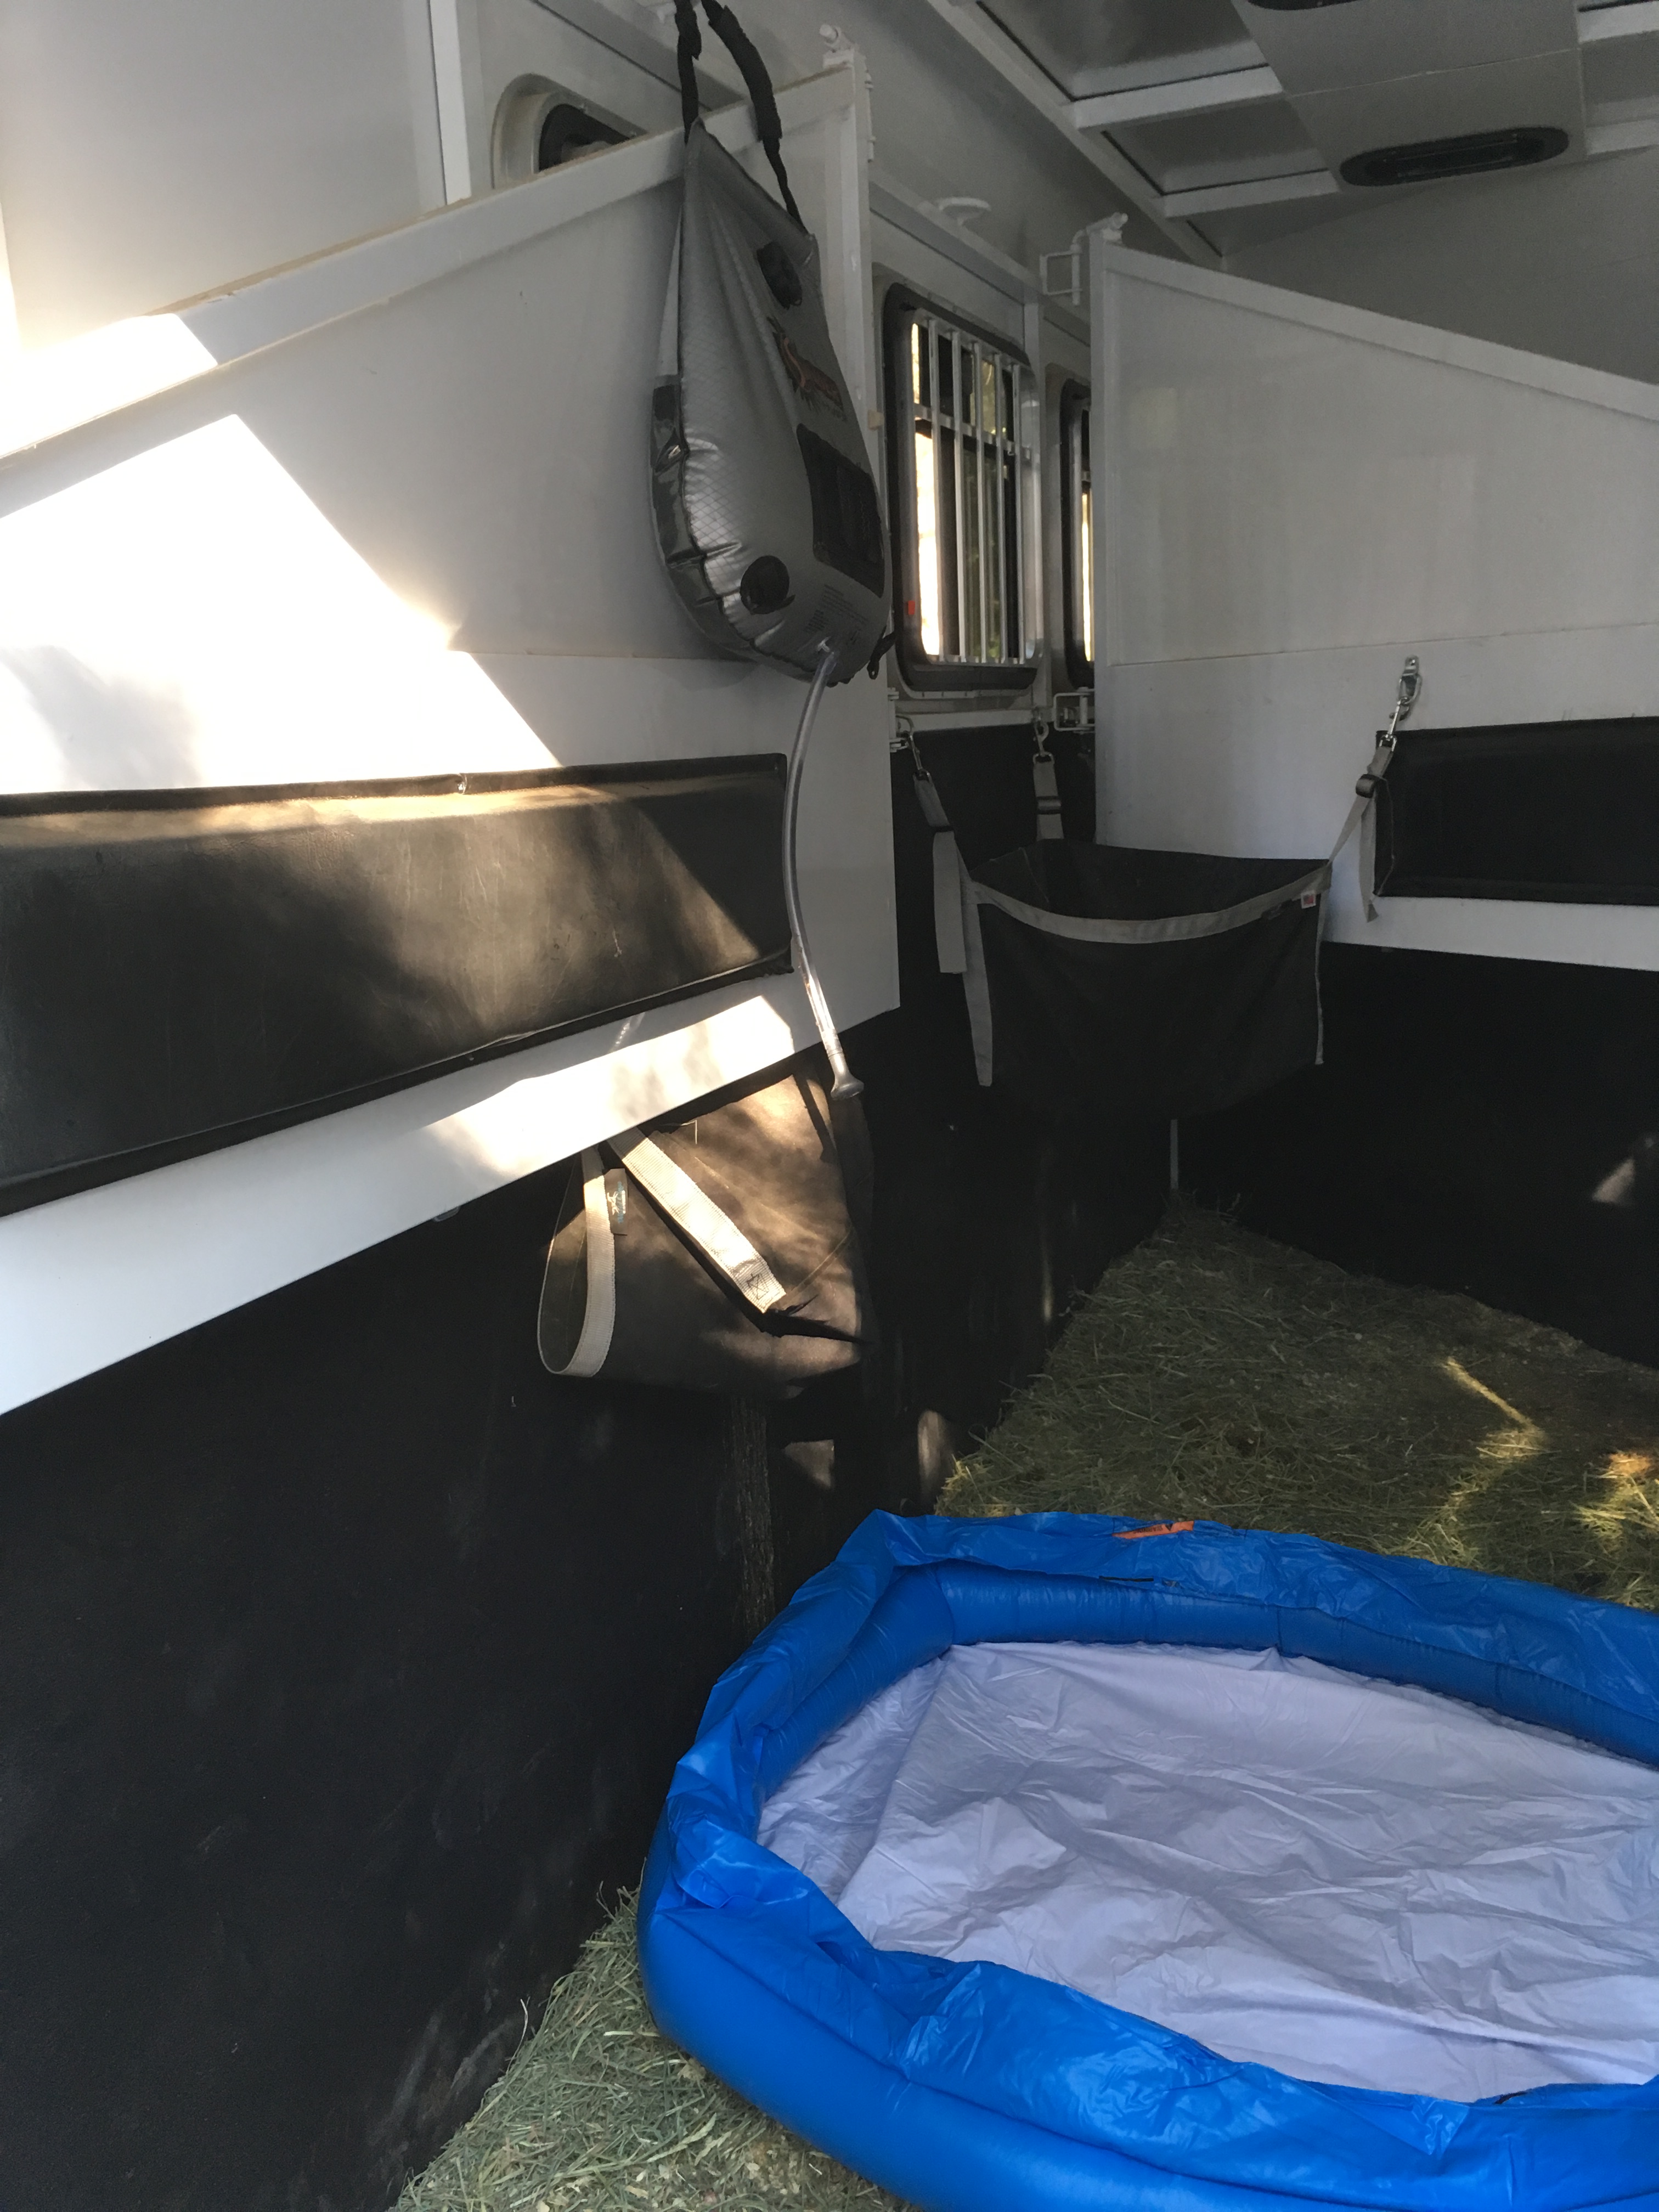 How to Go Horse Camping - Shower in your Trailer